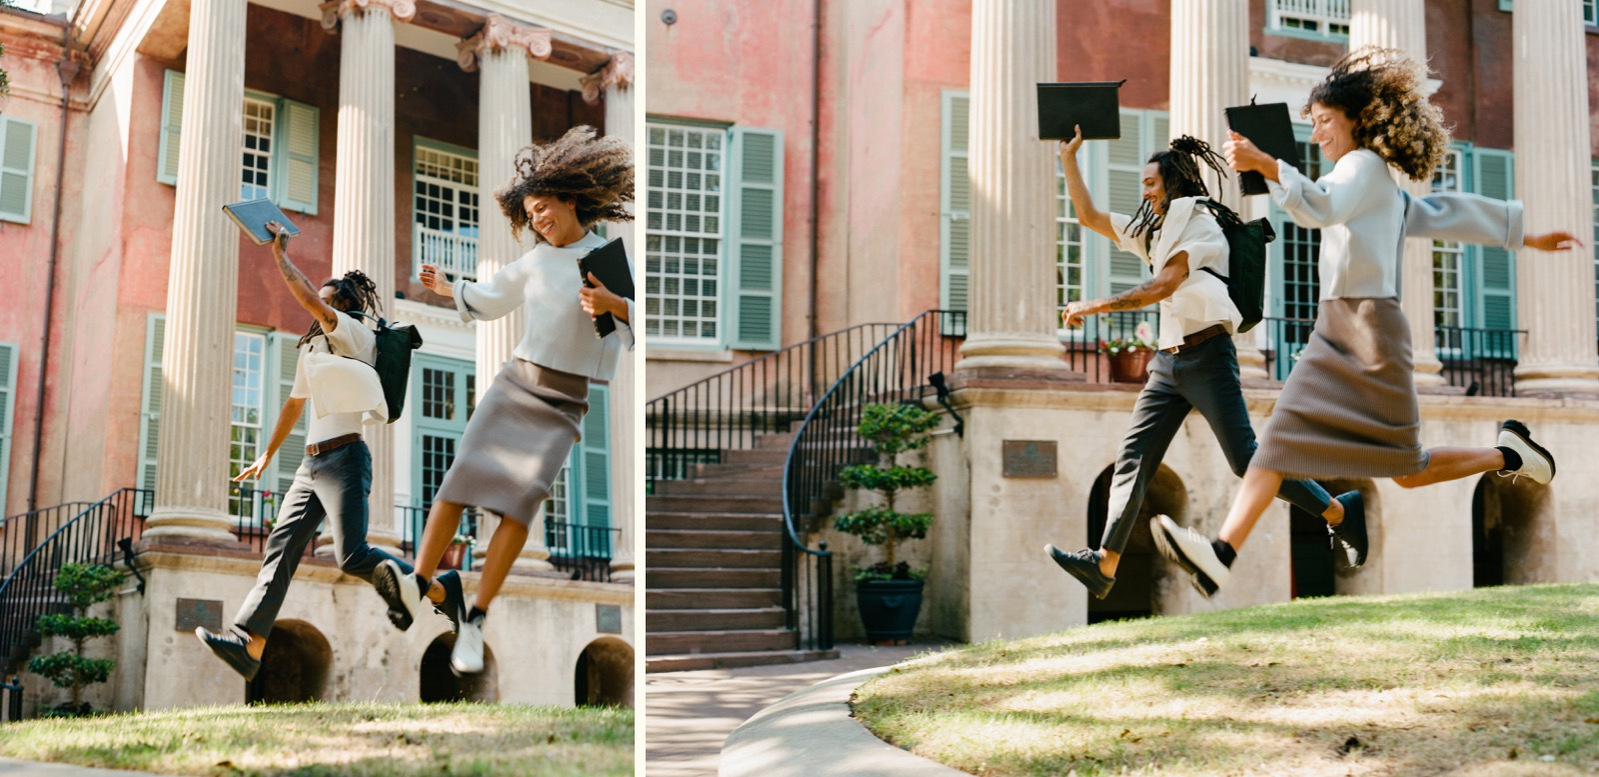 Two students leaping in the air with their books and backpacks flying